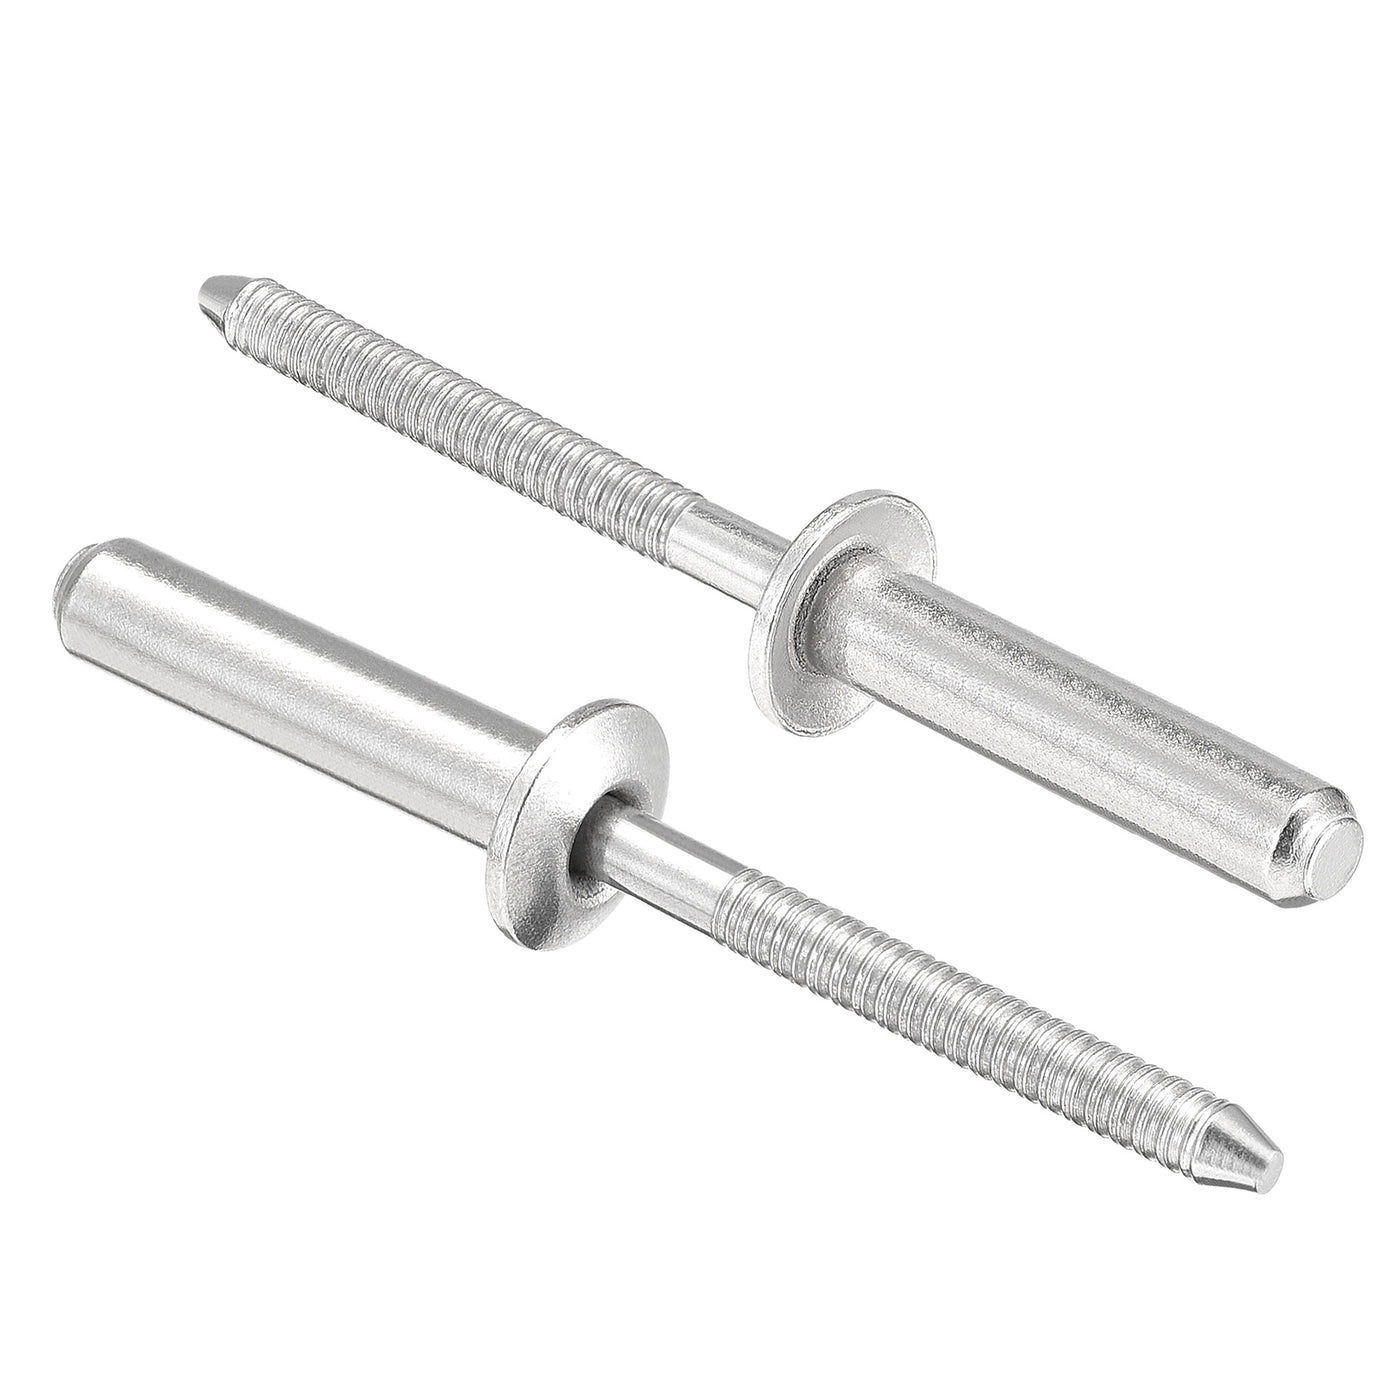 uxcell Uxcell Blind Rivets 304 Stainless Steel 4.8mm Diameter 25mm Grip Length 25pcs